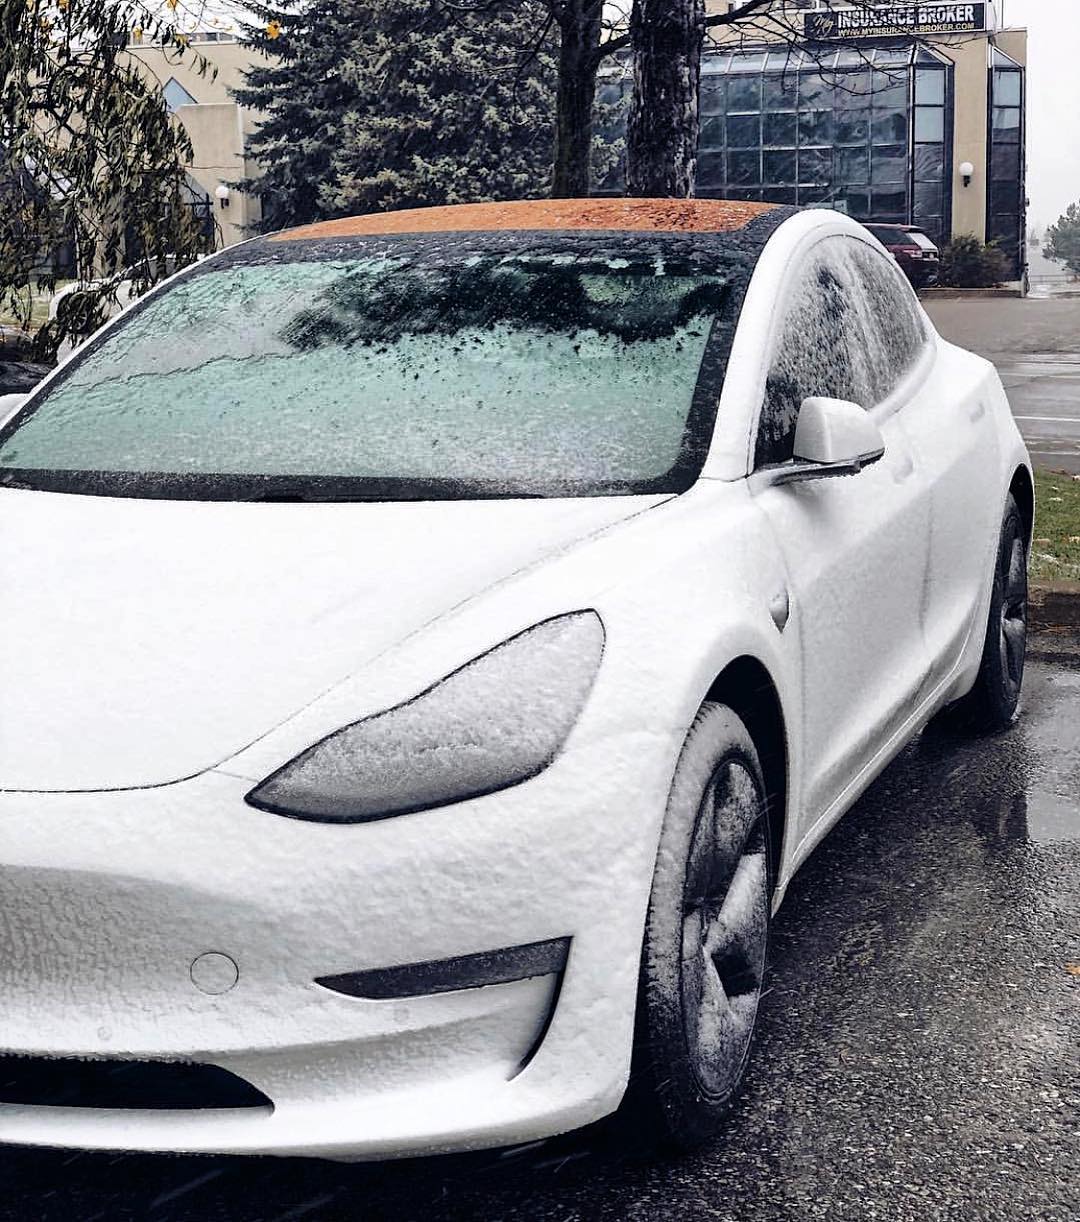 White Tesla Model 3 frosted by snow on headlights, bumper and bonnet